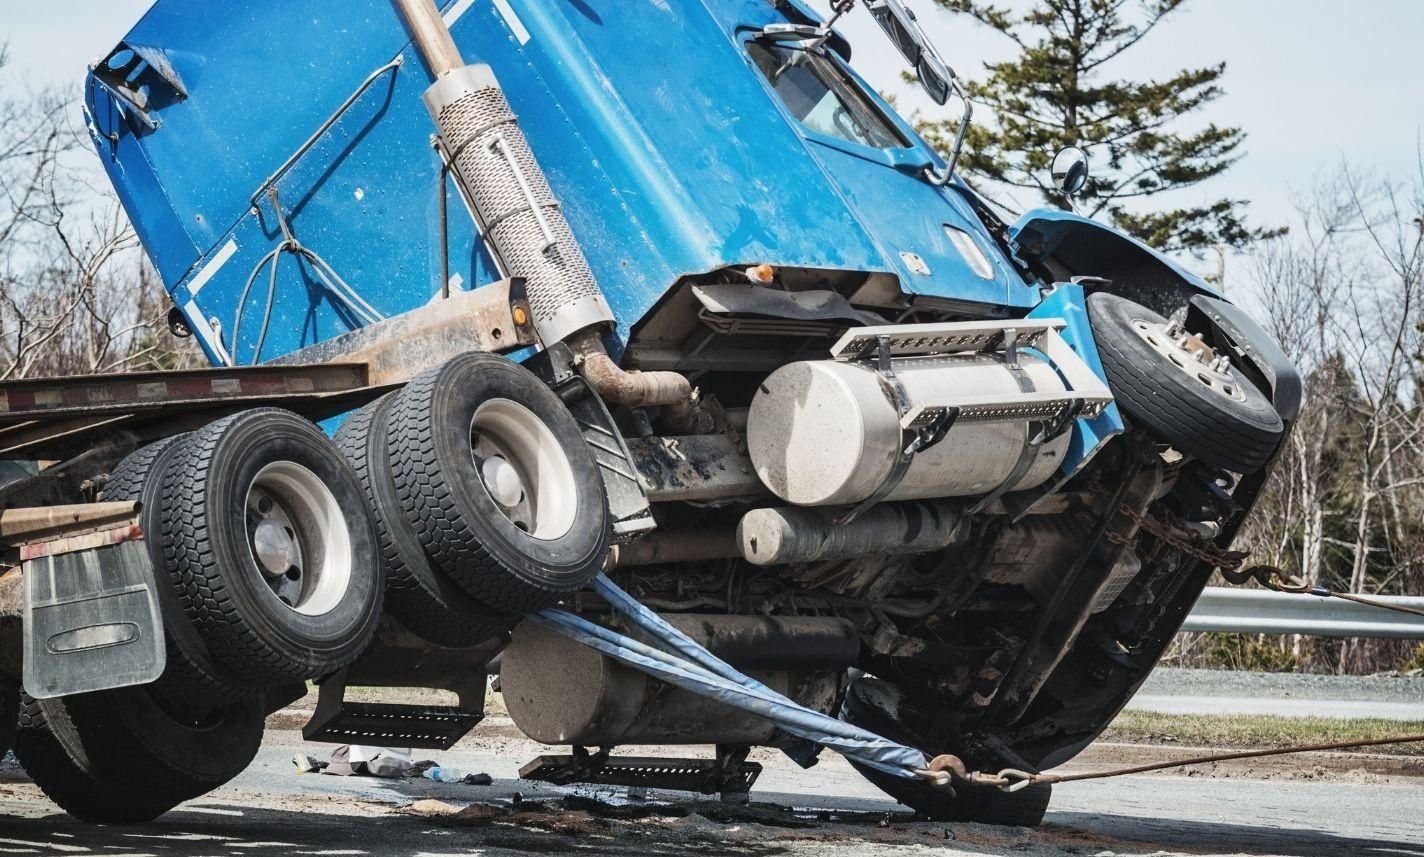 tignall-commercial-truck-accident-injury-lawyer